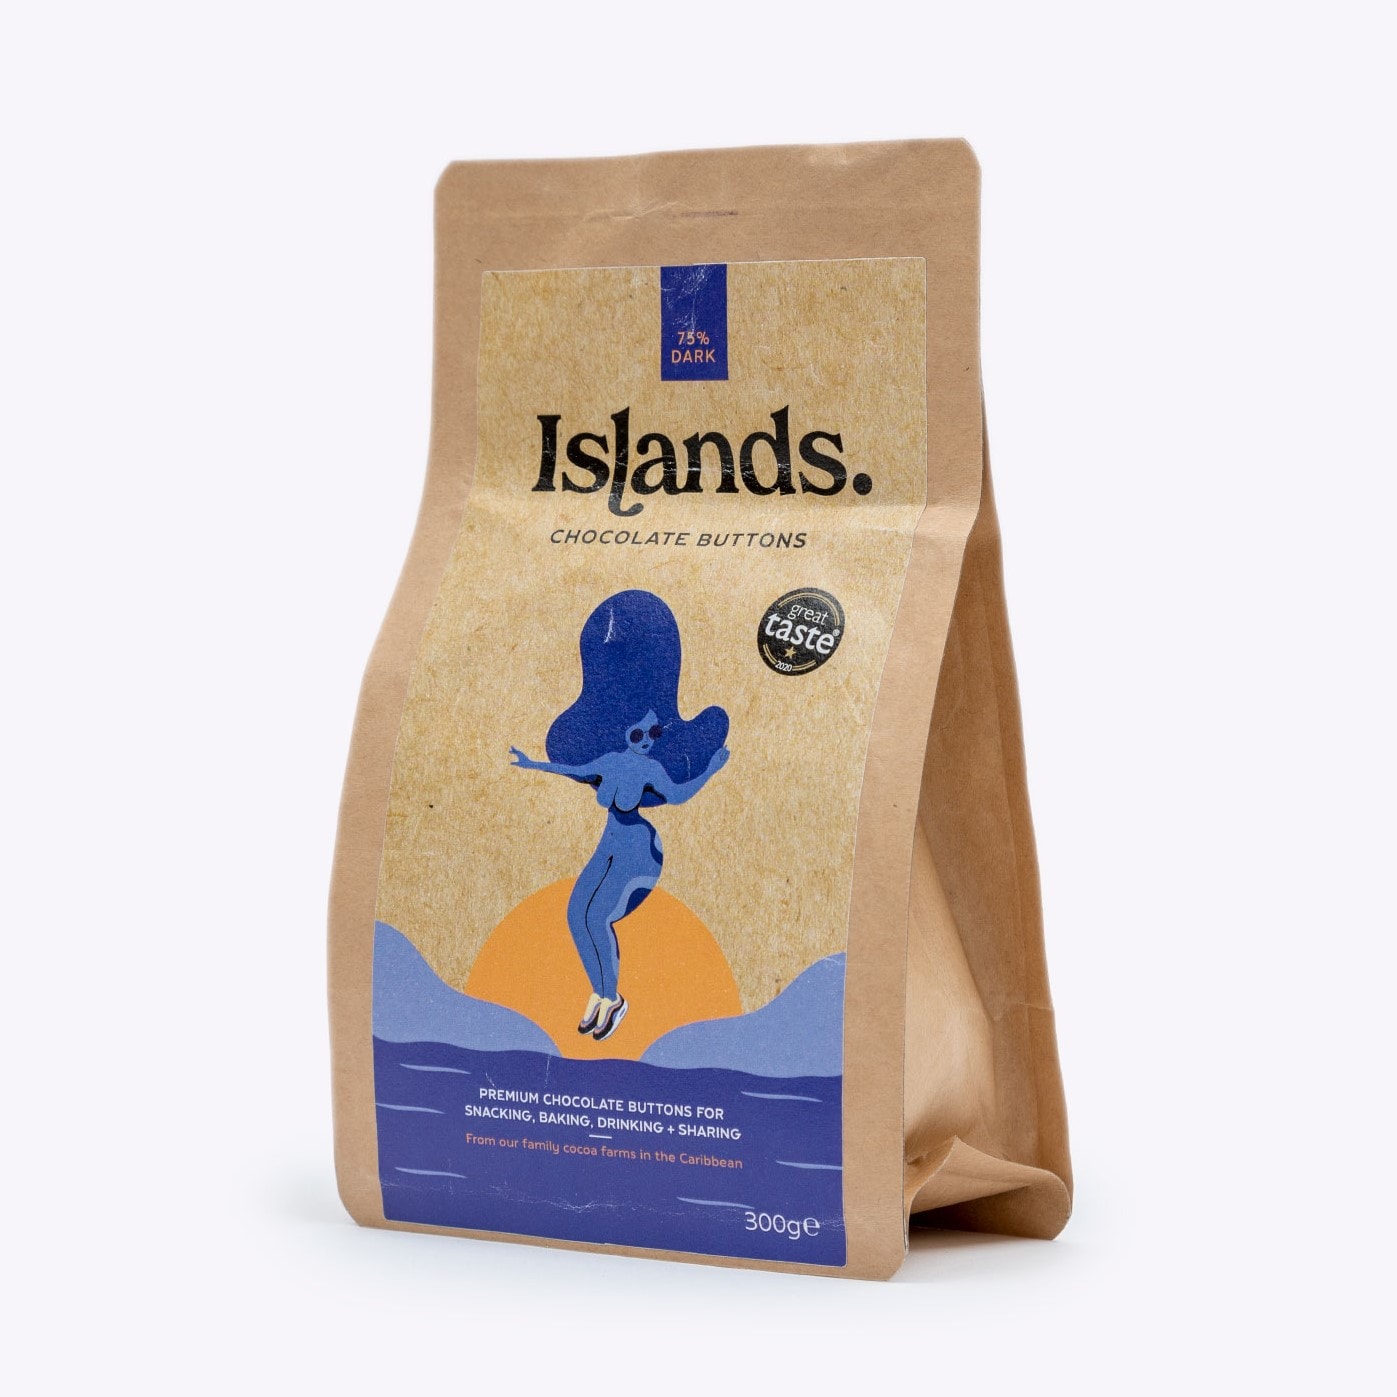 75% Islands Chocolate Buttons